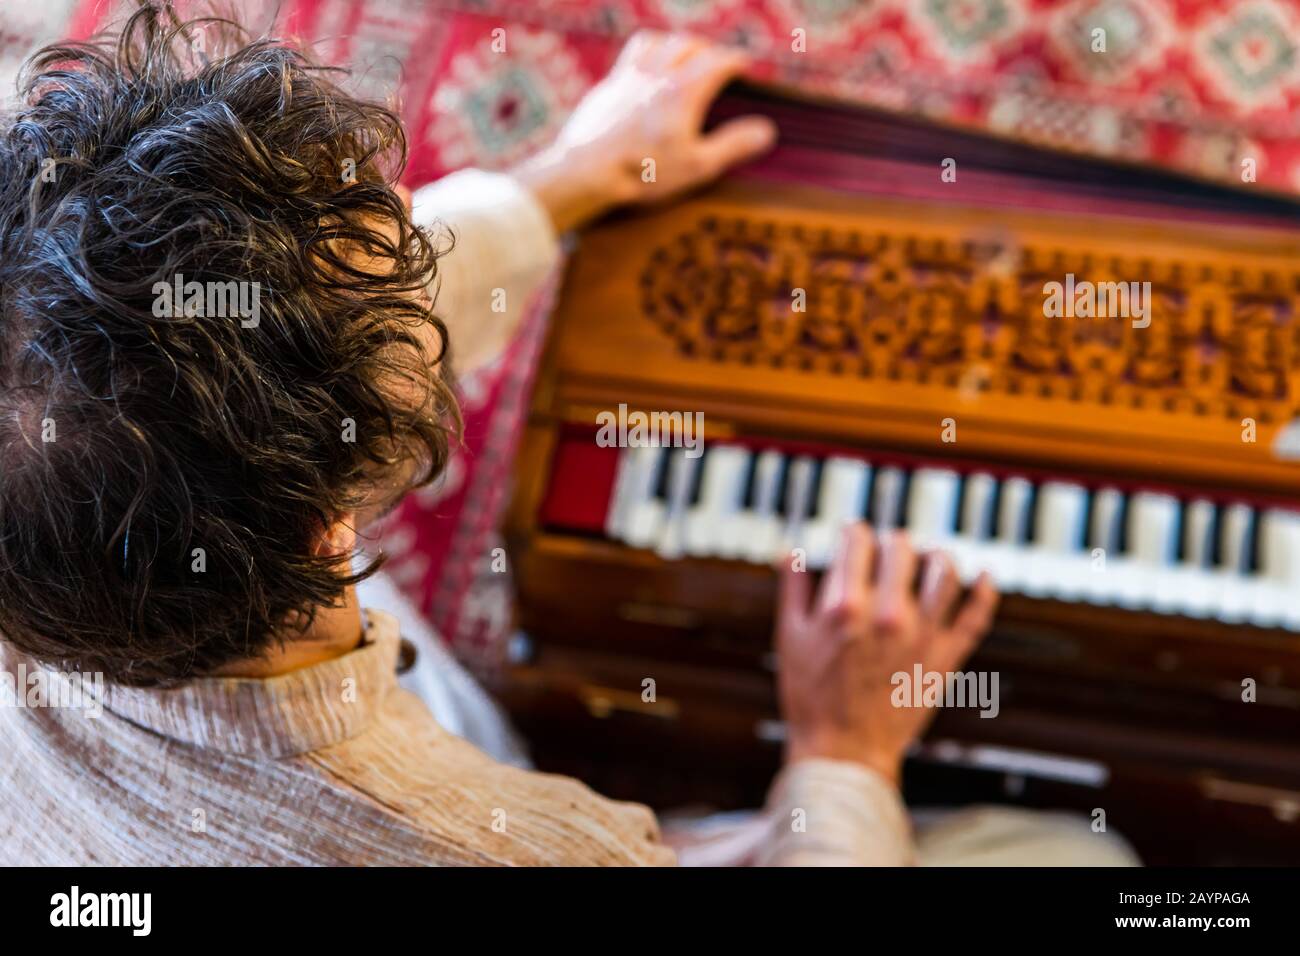 High angle view of young male shamanic playing kirtan music using musical instrument harmonium for meditation and positive vibrations Stock Photo